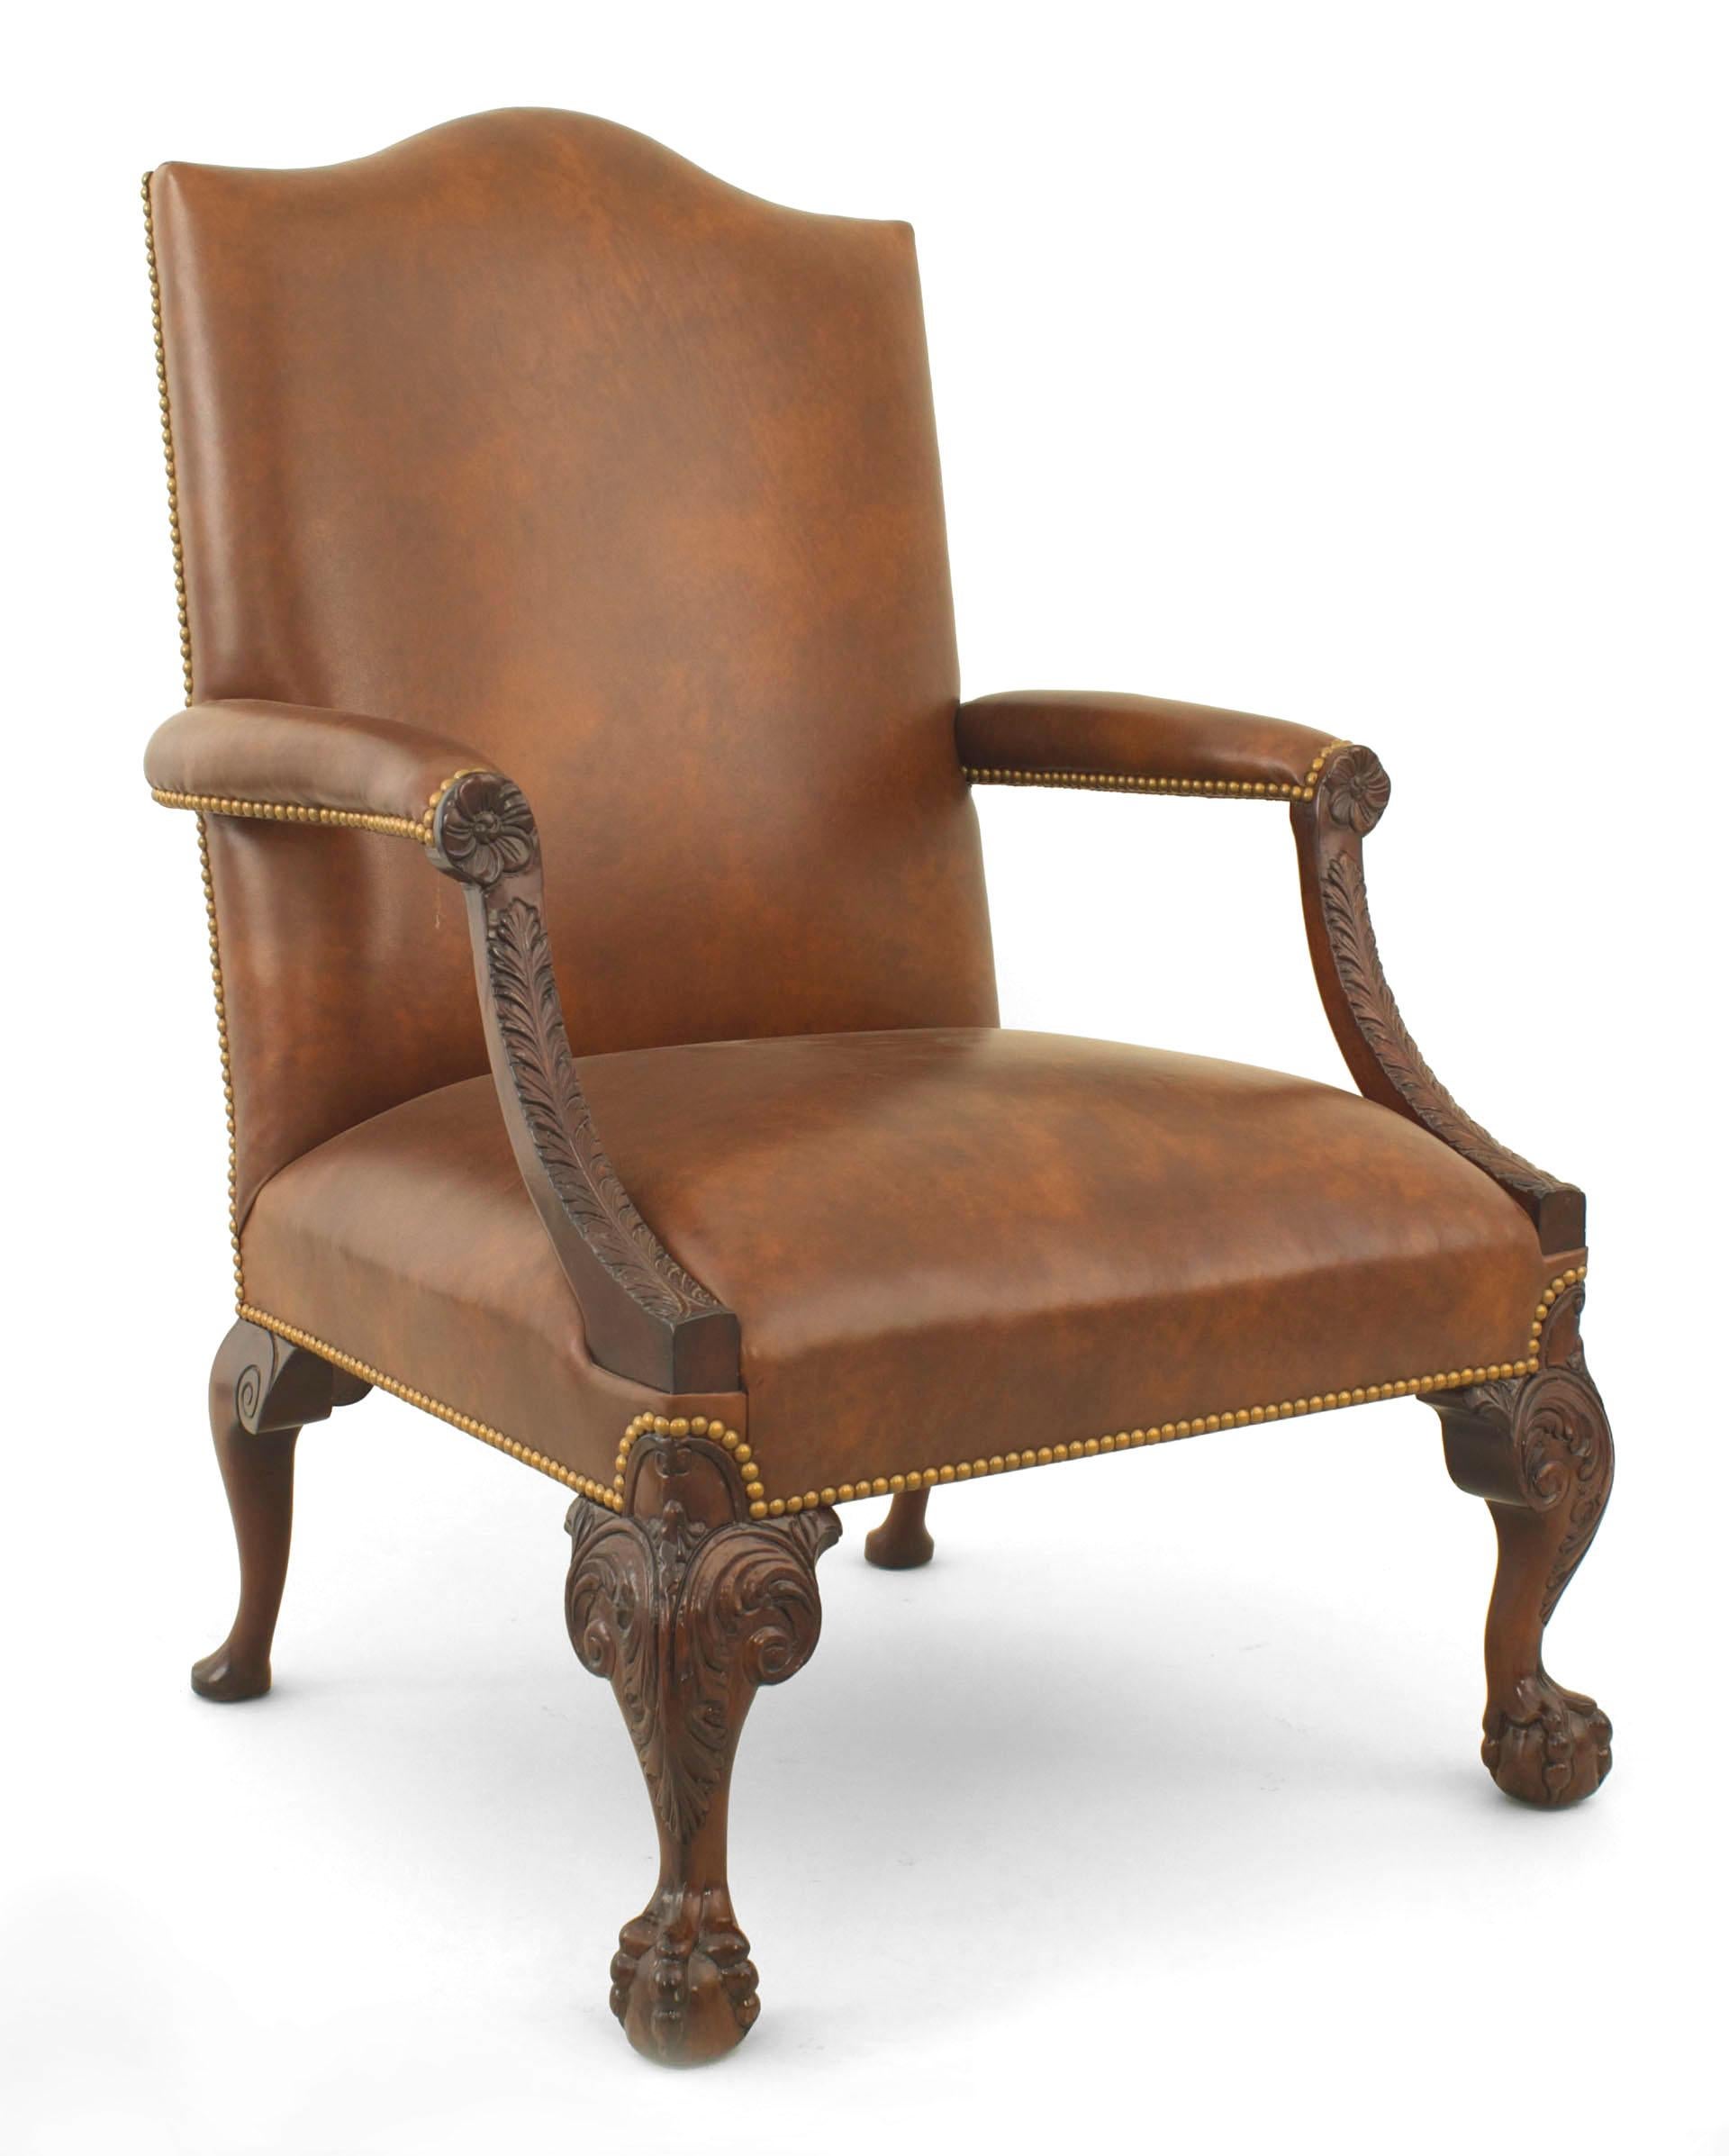 20th Century English Chippendale Style Mahogany Carved Open Armchair For Sale